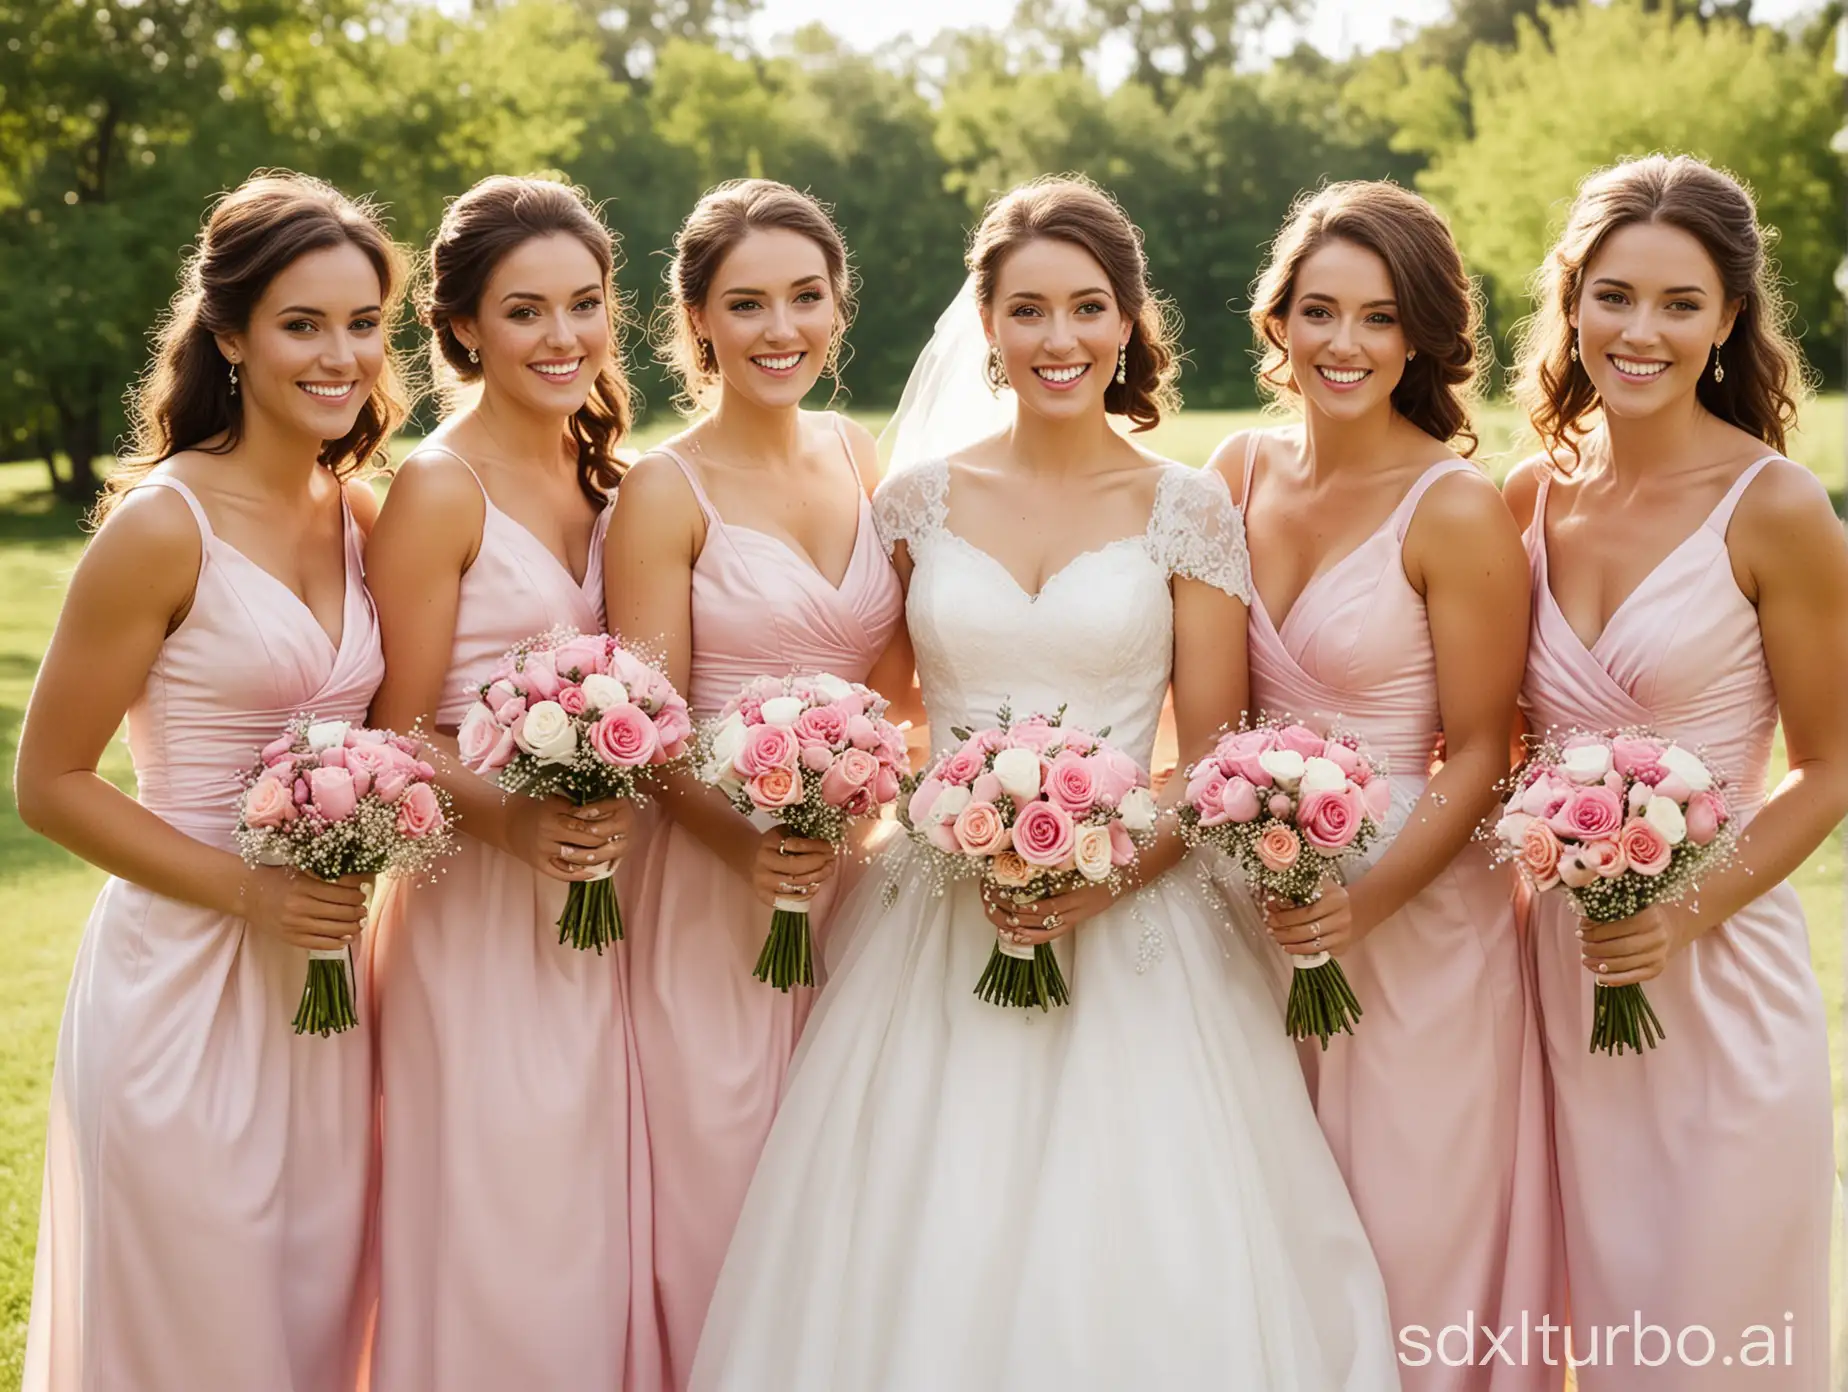 five young American women at a wedding, the bride in white wedding dress in the middle, smiling happily, the other four are bridesmaids wearing pink bridesmaid dresses holding bouquets, smiling happily, each person's face should be distinct, posture casual, background is grass, sunny, clear and sharp focus, high quality